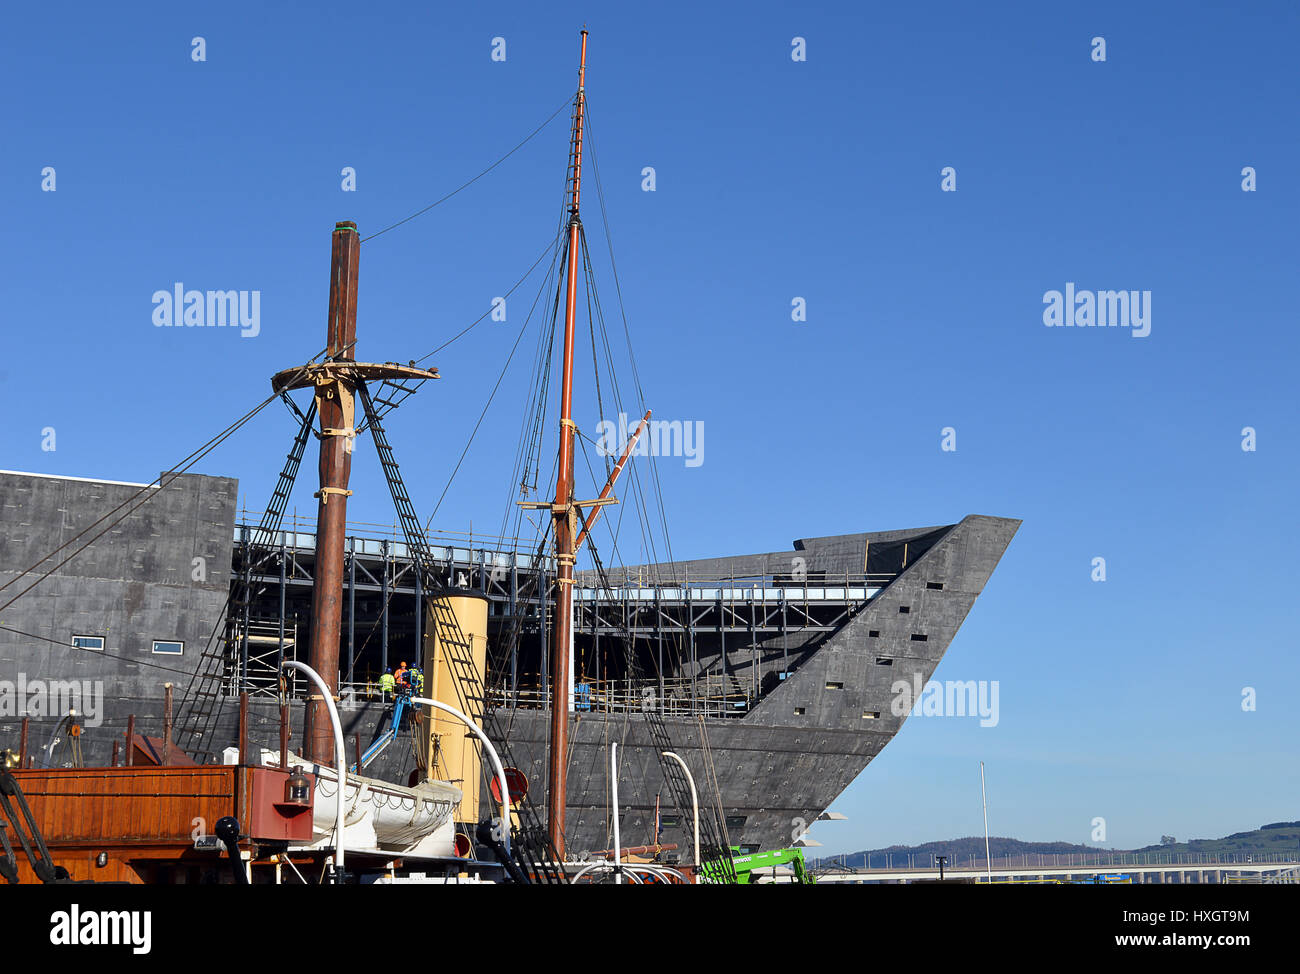 DUNDEE, SCOTLAND - 27 MARCH 2017: The ship shape of the new Victoria and Albert Museum of Design under construction on the north bank of the River Tay Stock Photo